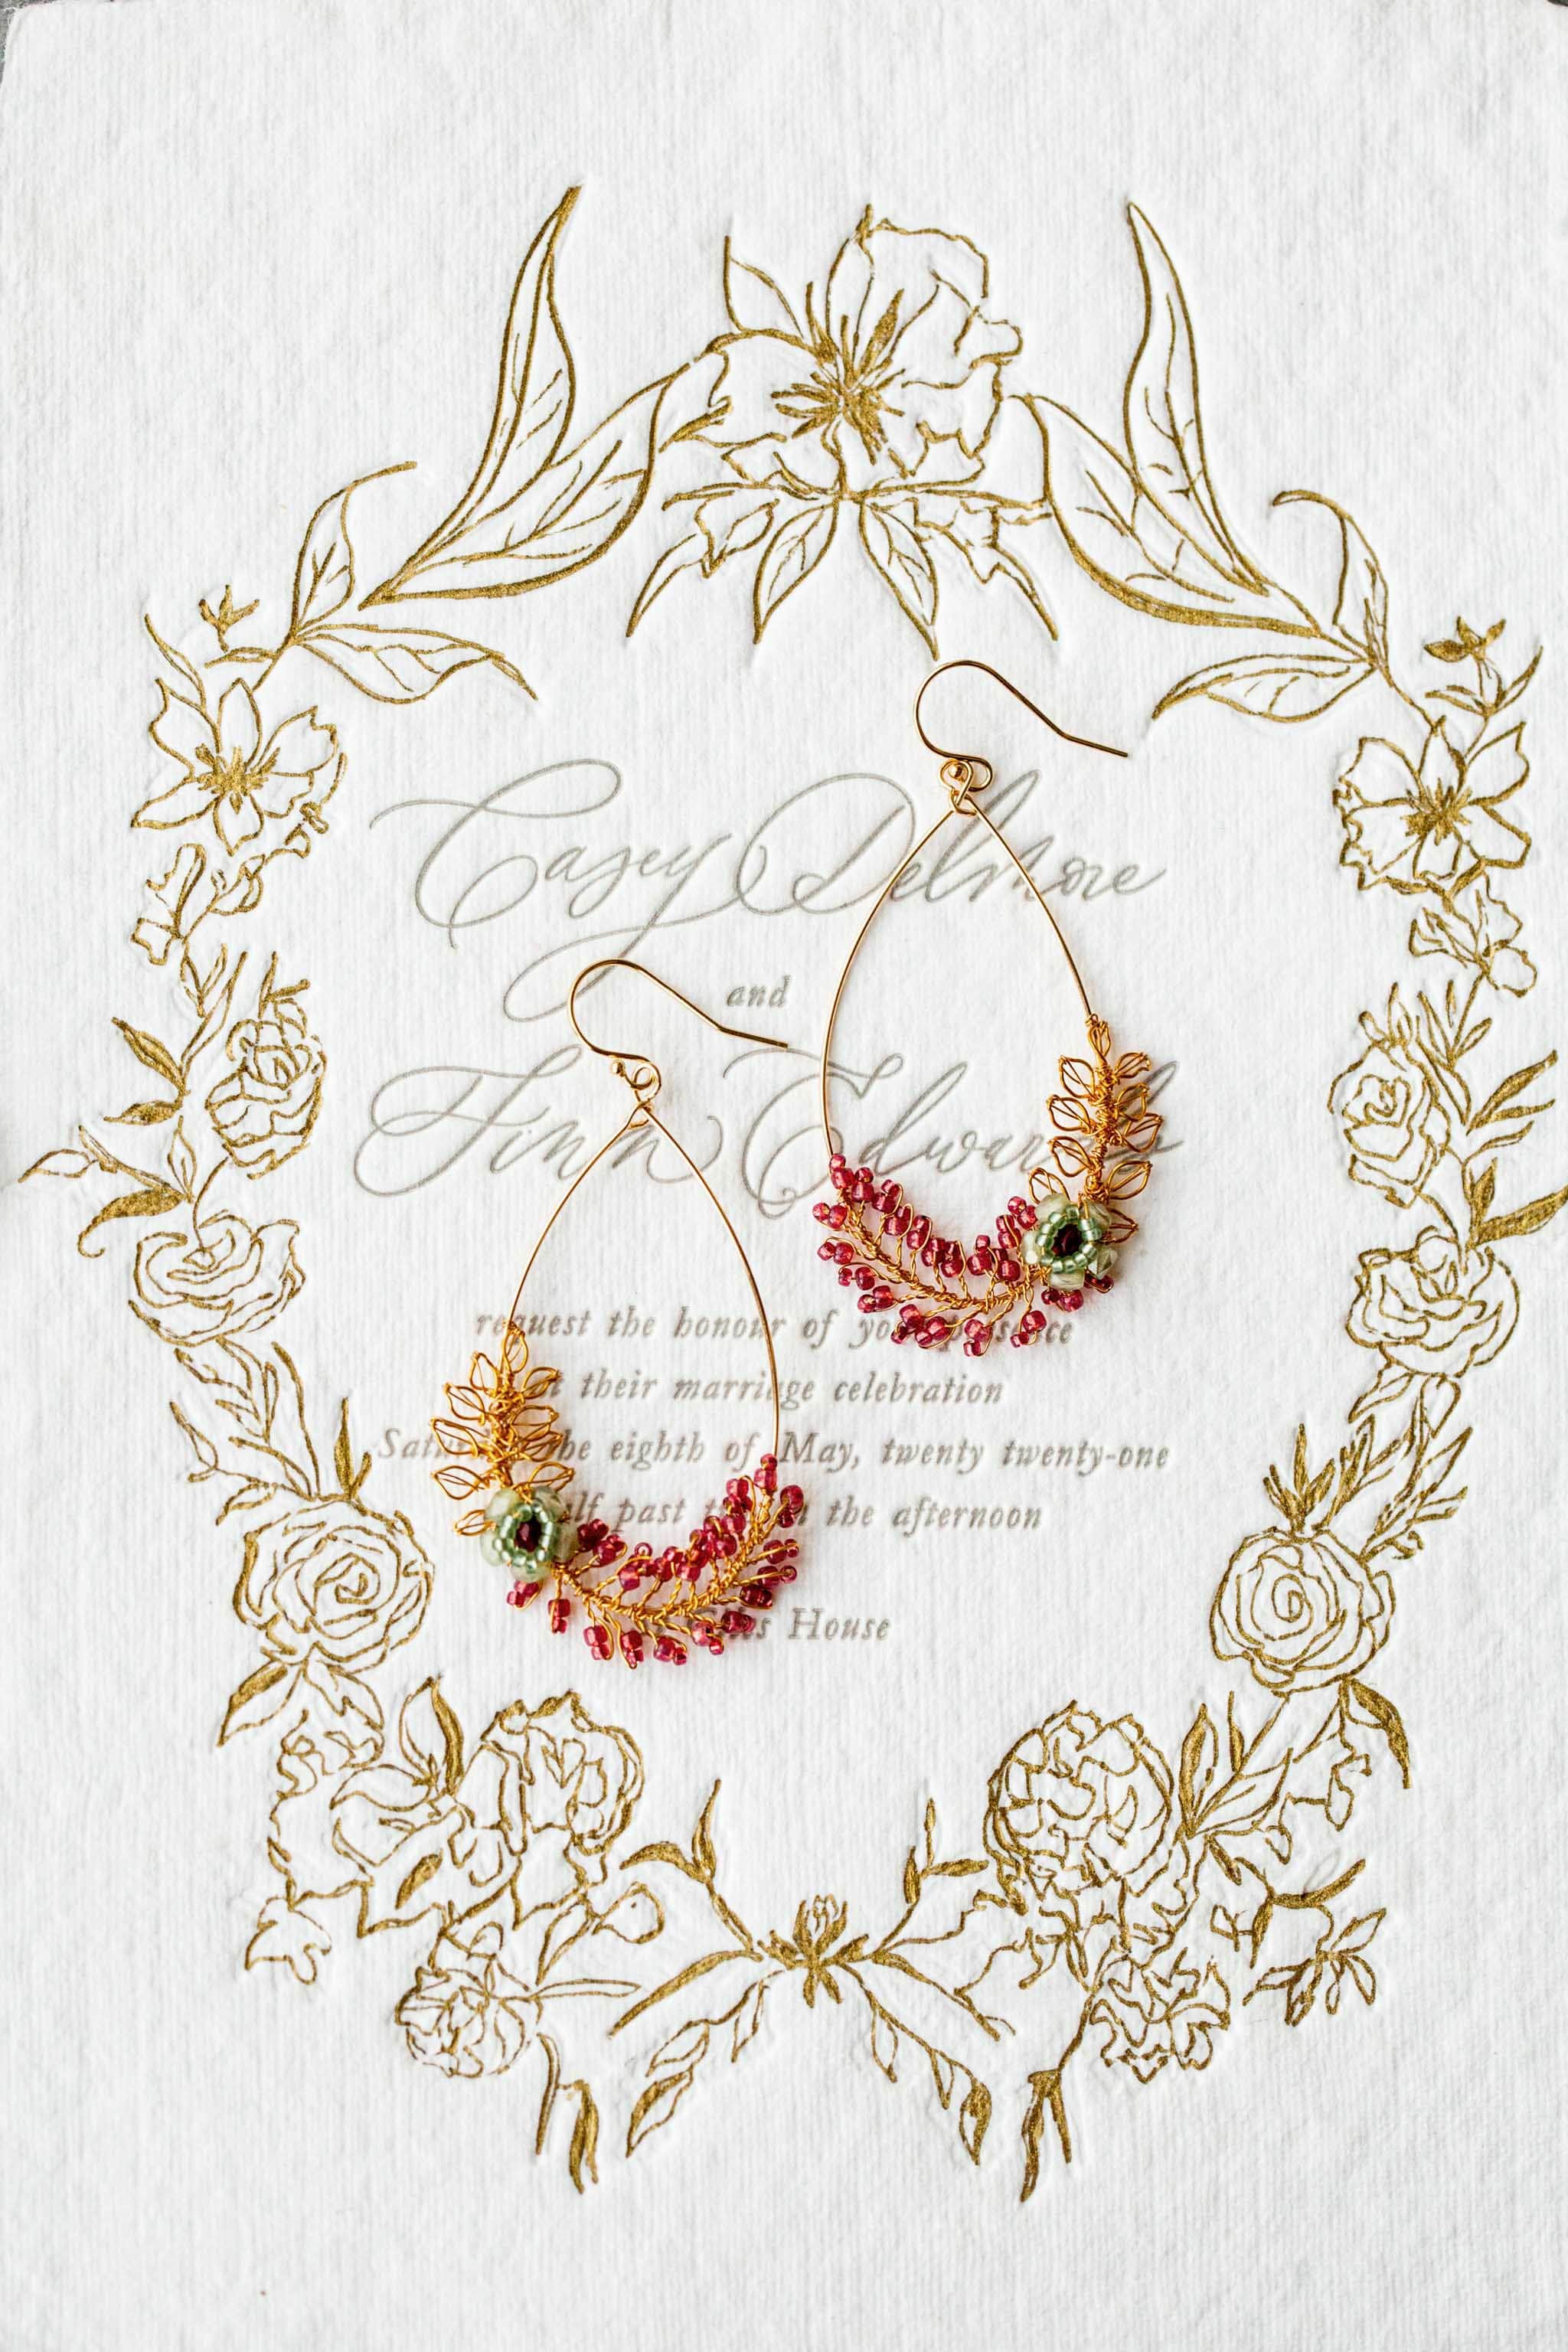 Cora wedding earrings in gold, red and green by Judith Brown Bridal